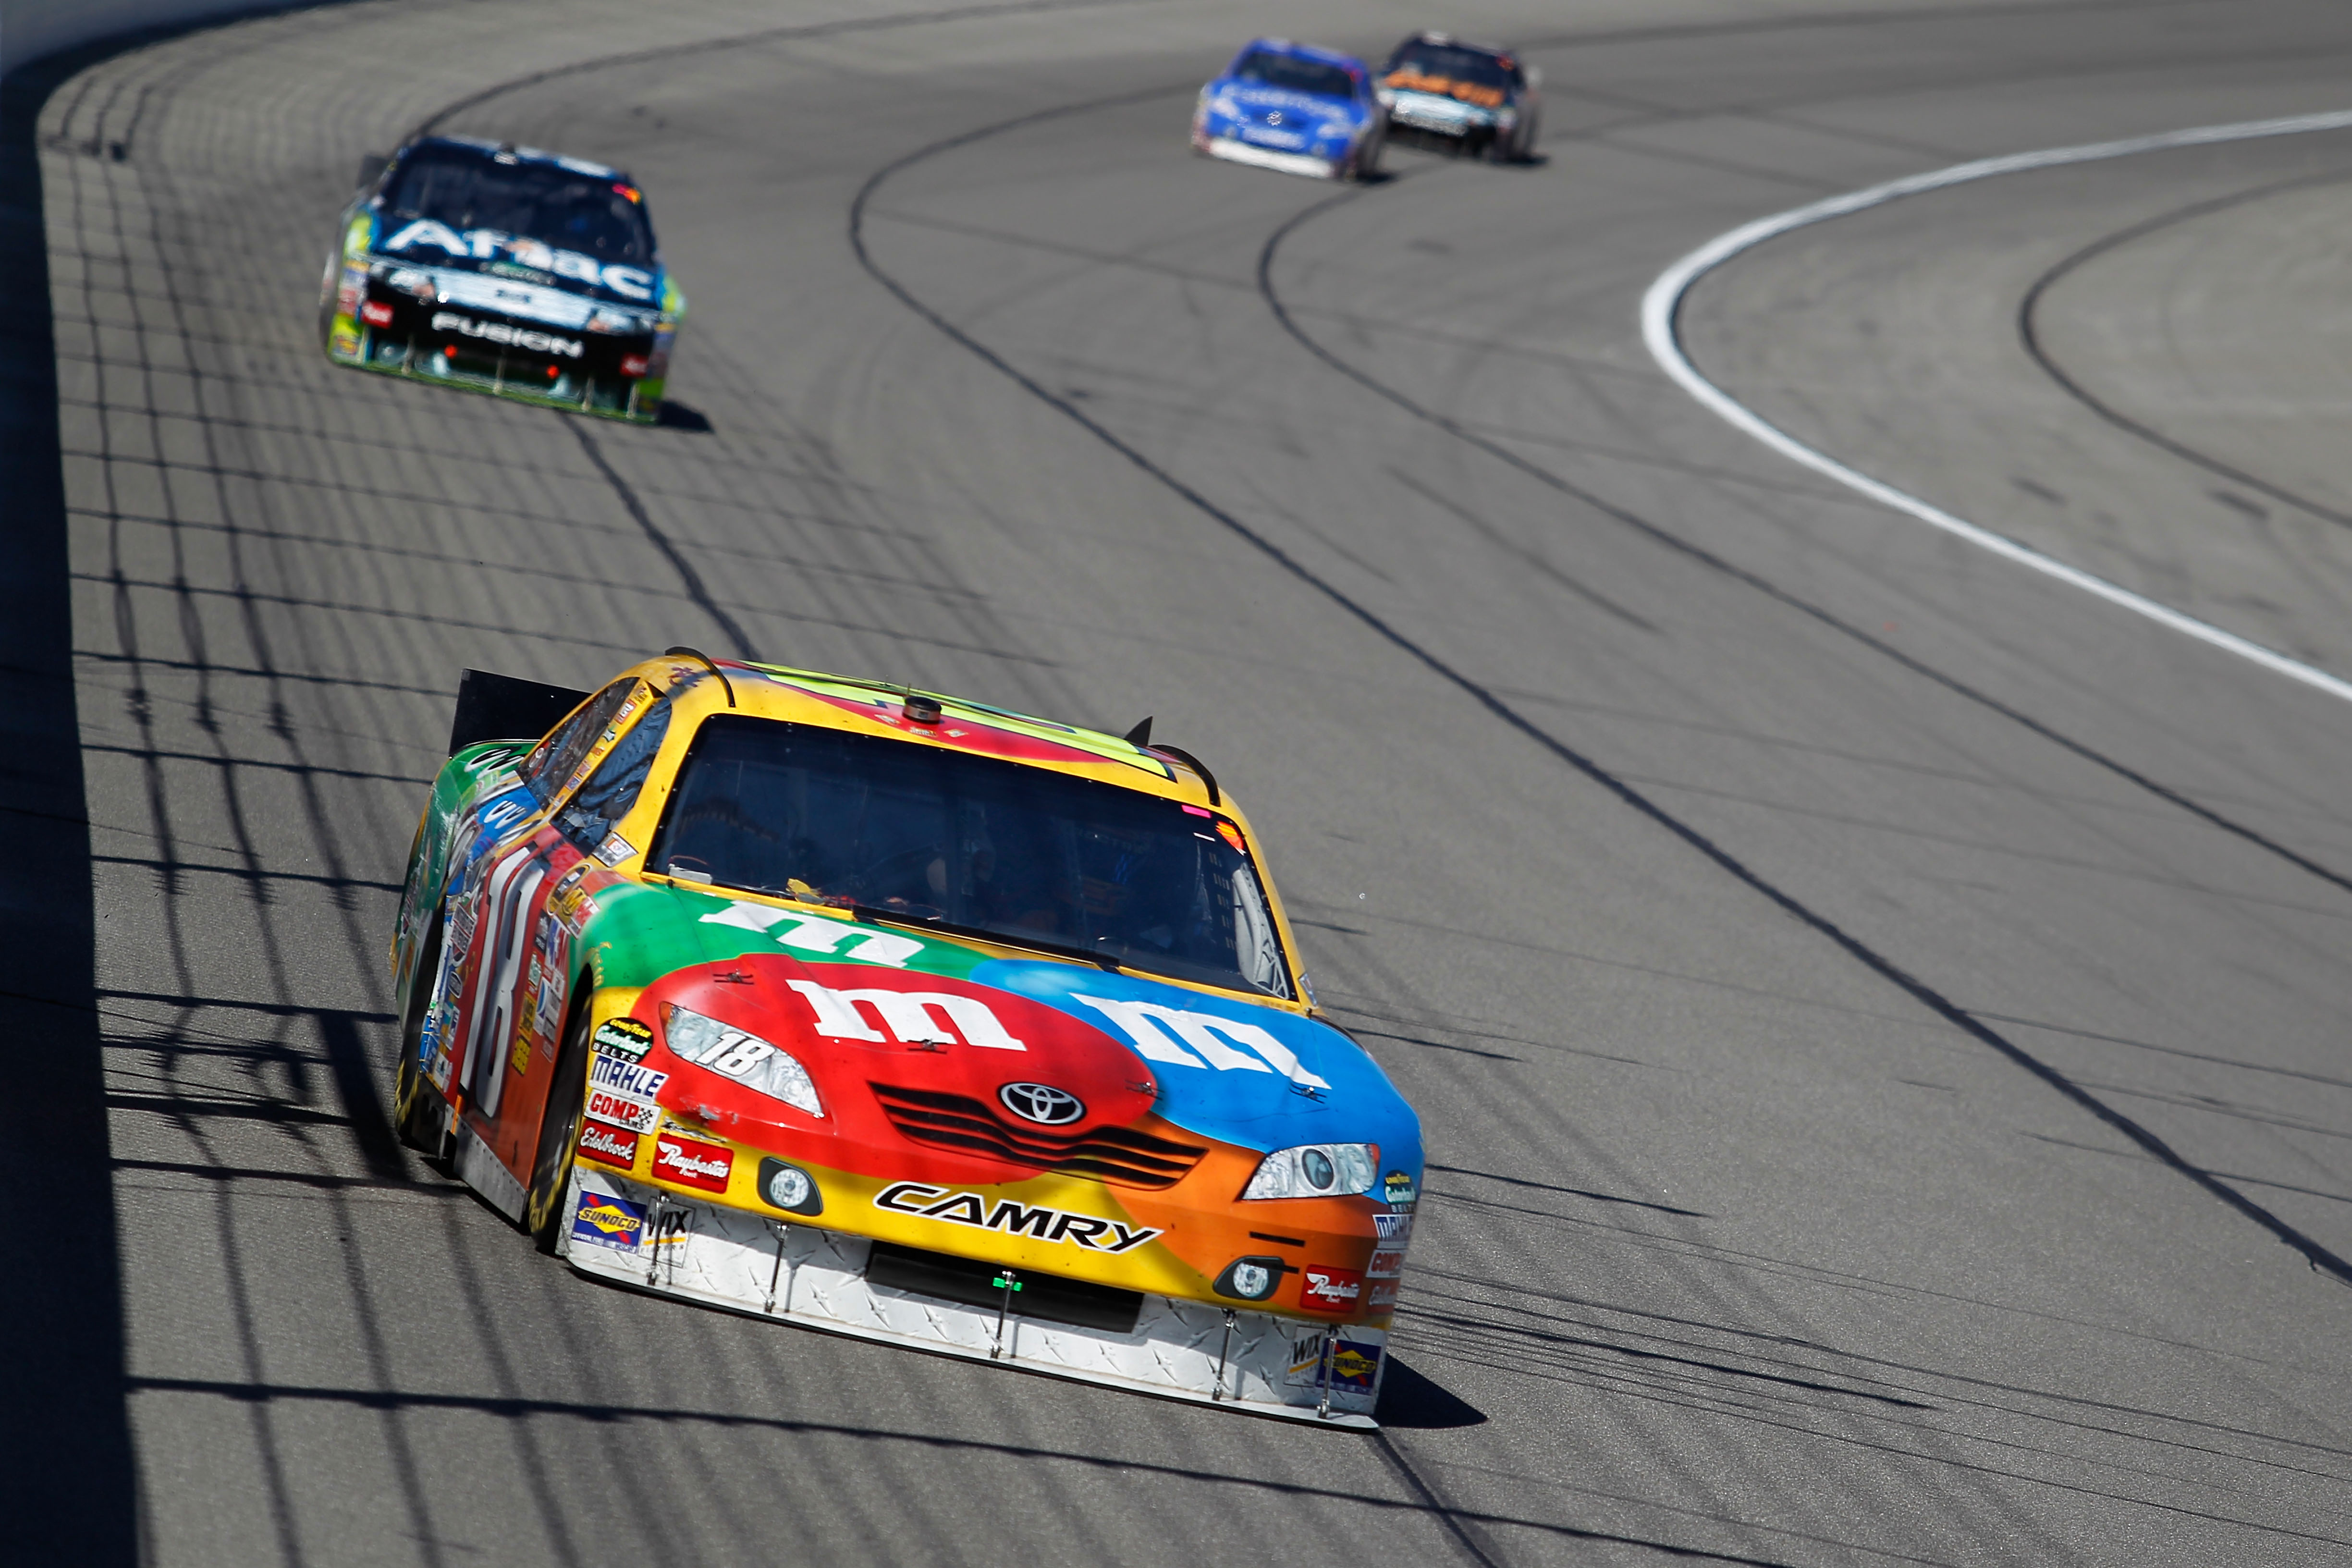 KANSAS CITY, KS - OCTOBER 03:  Kyle Busch, driver of the #18 M&M's Toyota, leads a line of cars during the NASCAR Sprint Cup Series Price Chopper 400 on October 3, 2010 in Kansas City, Kansas.  (Photo by Todd Warshaw/Getty Images)